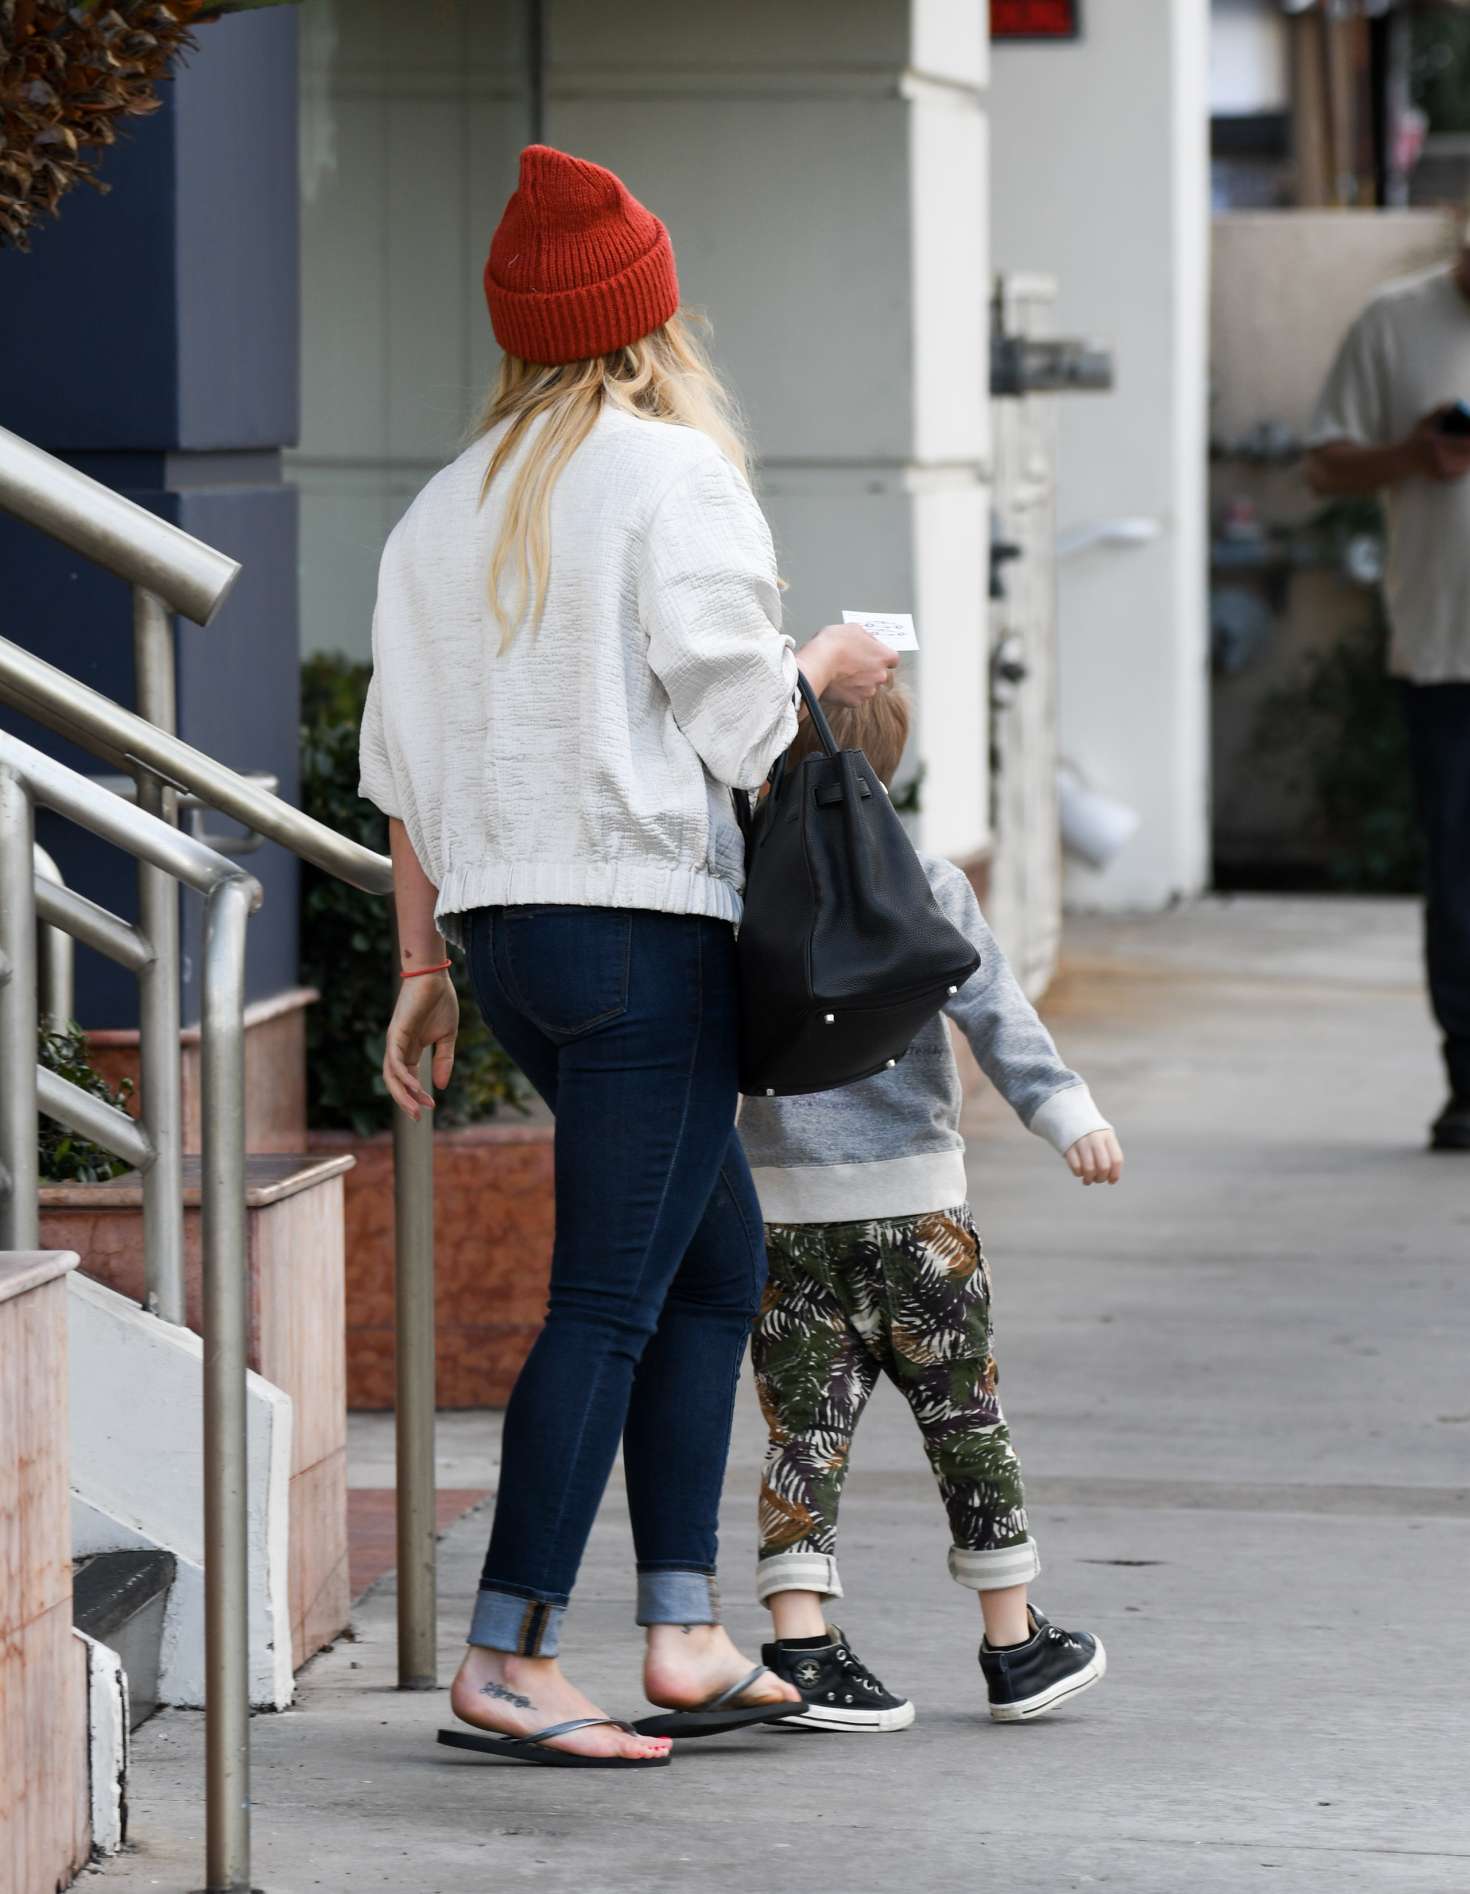 Hilary Duff 2017 : Hilary Duff lunch with her son in Studio City -28